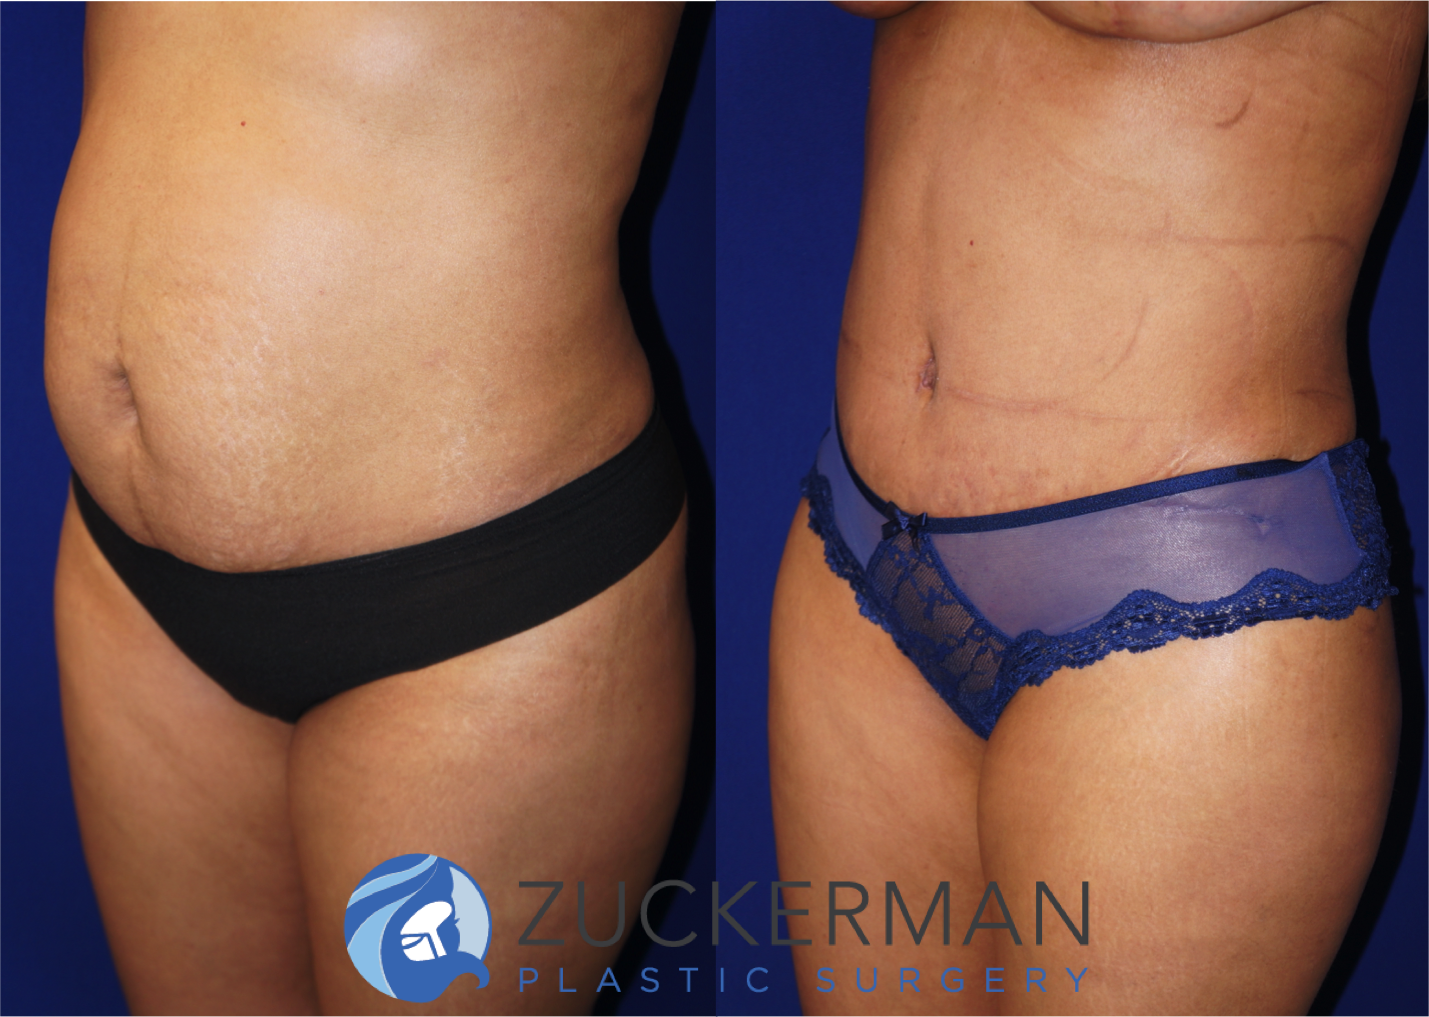 Left oblique view of an abdominoplasty (tummy tuck) by Dr. Zuckerman, images taken before surgery and two months after. Includes liposuction to the abdomen and flanks.